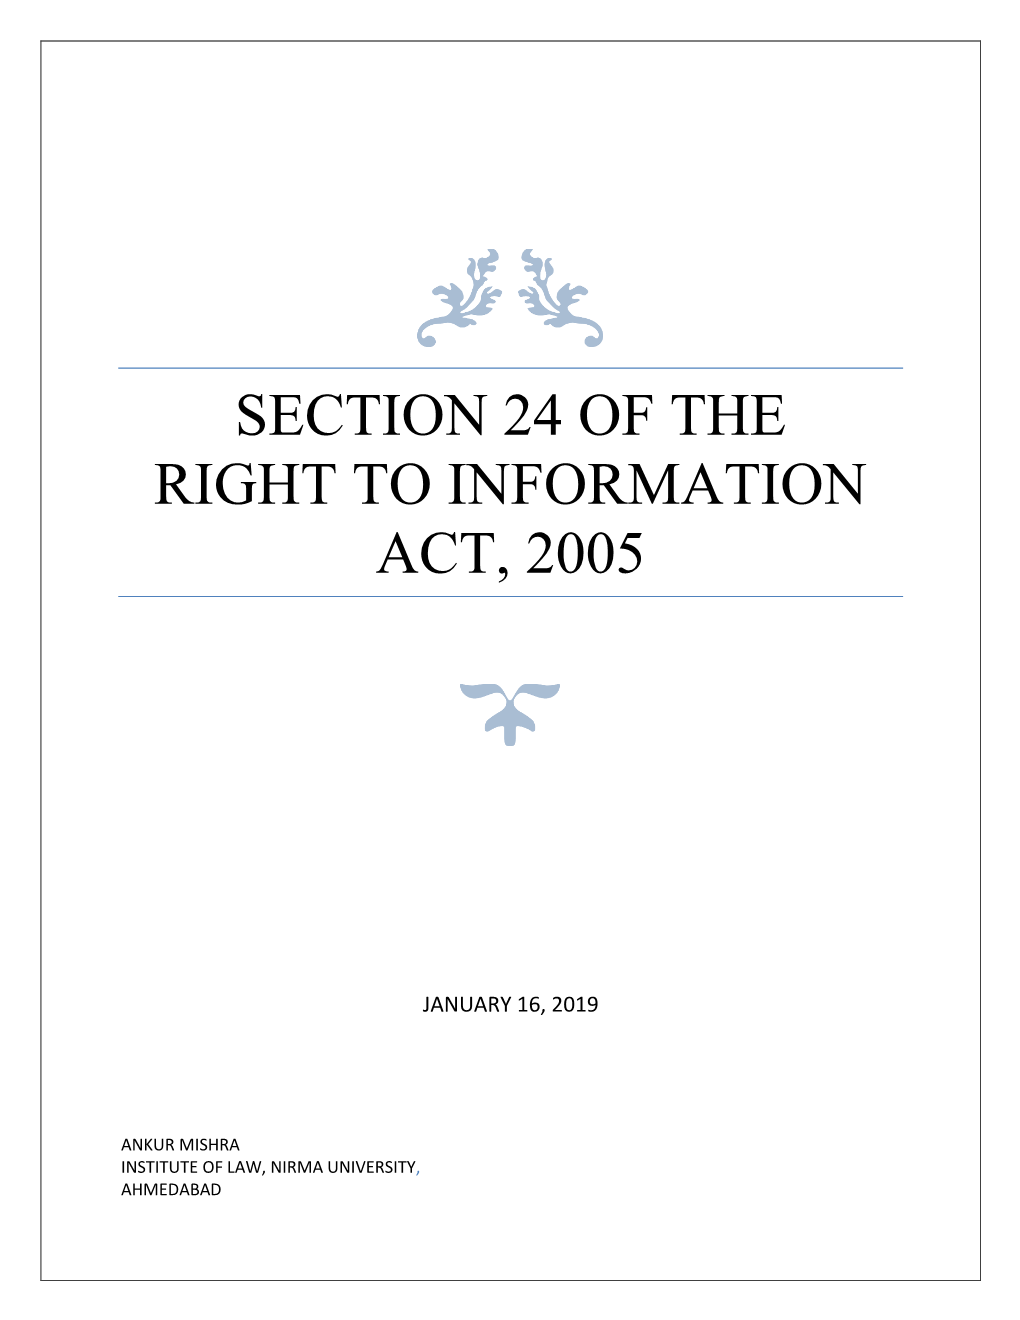 Section 24 of the Right to Information Act, 2005